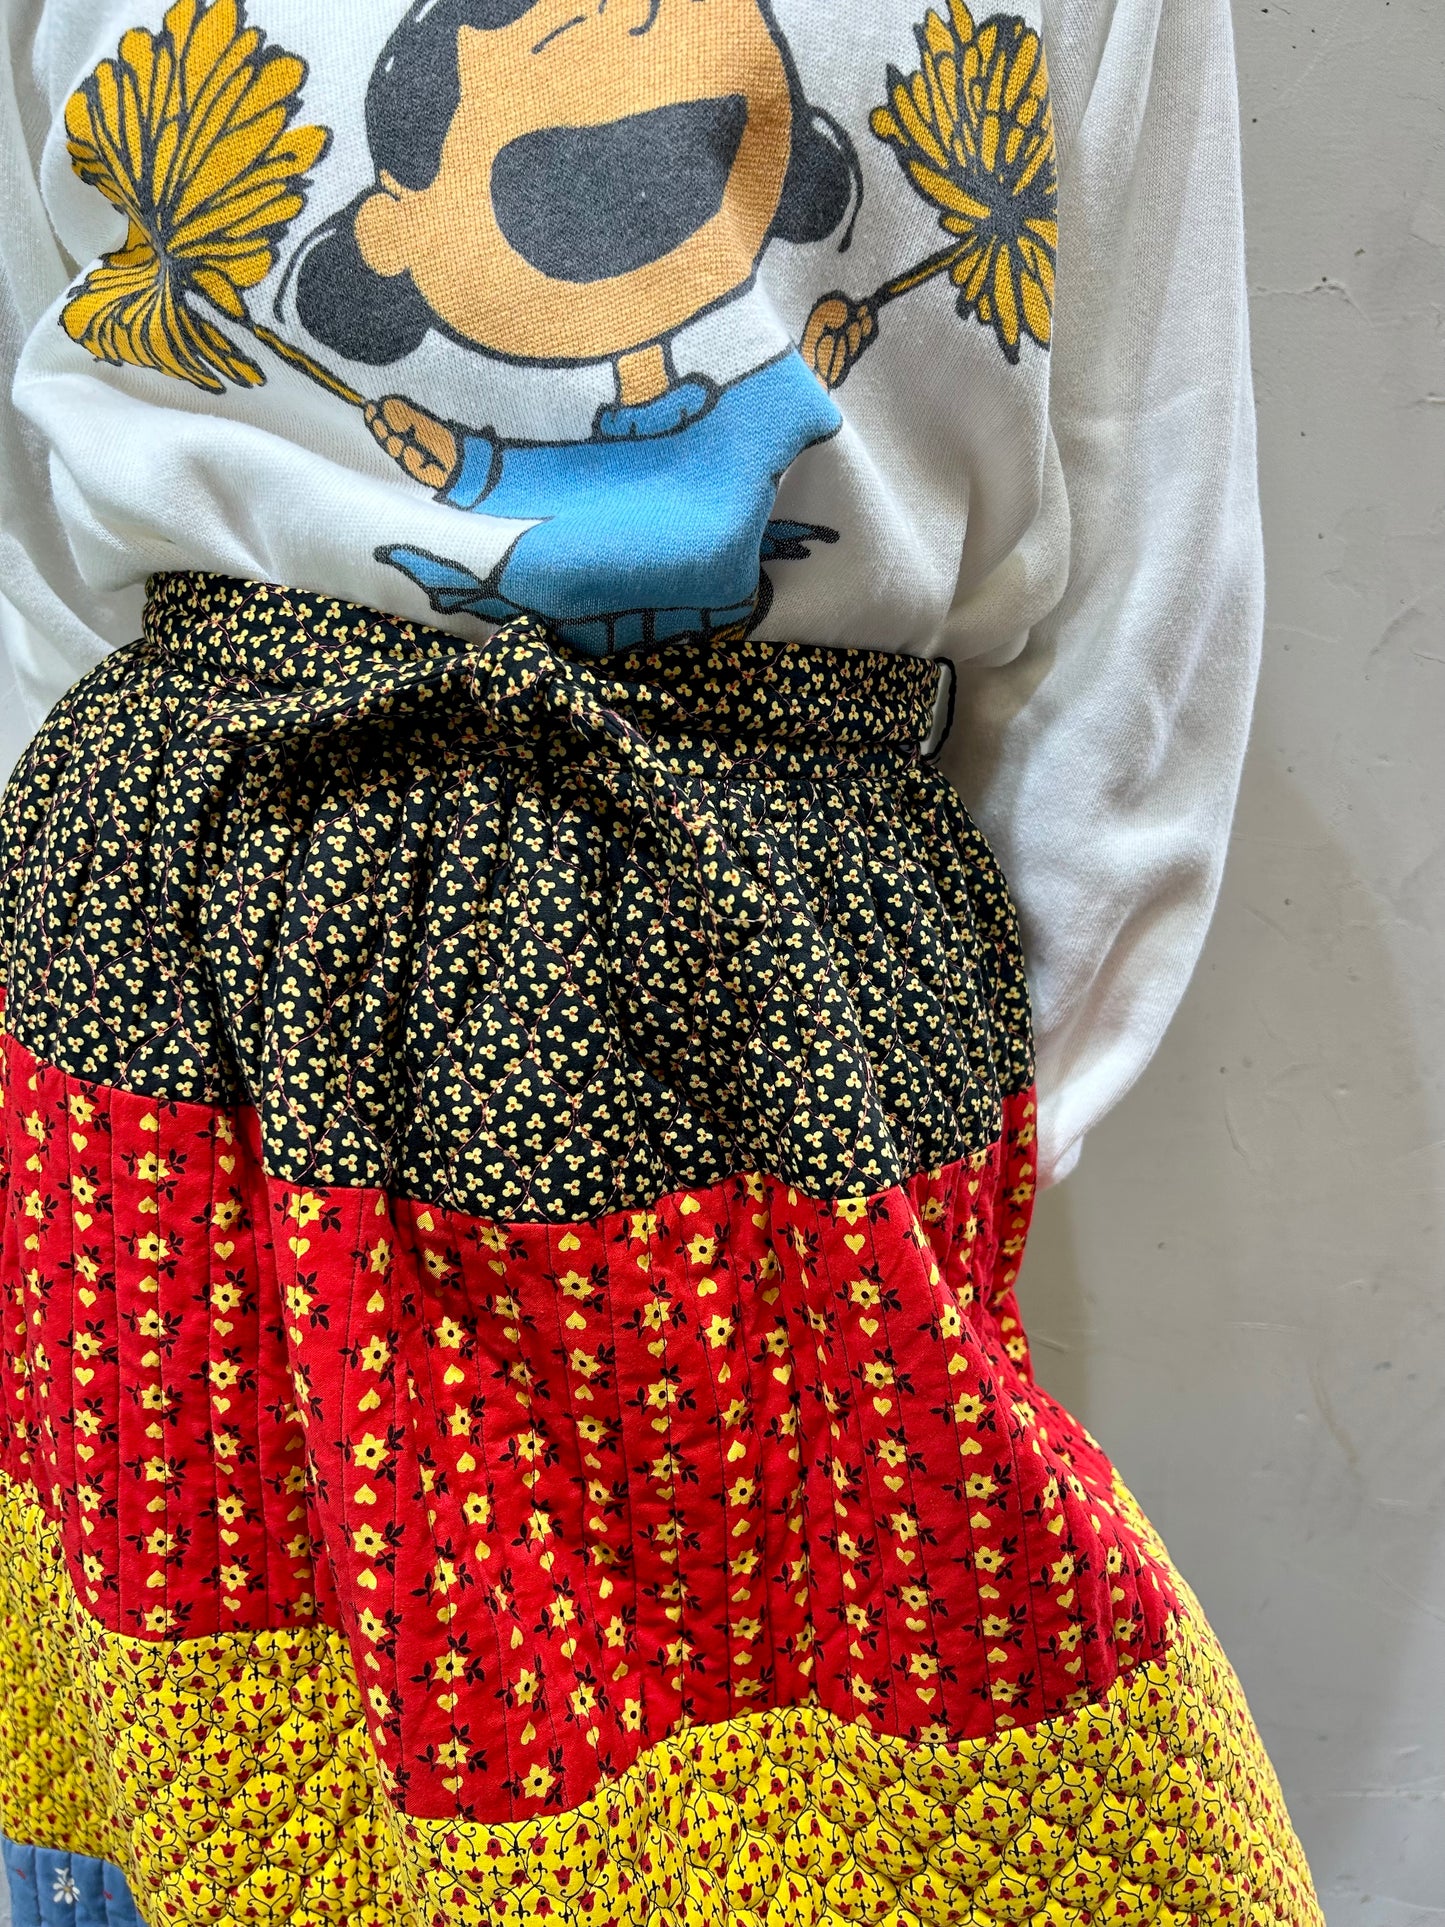 '70s Vintage Quilting Tiered Skirt [H24764]